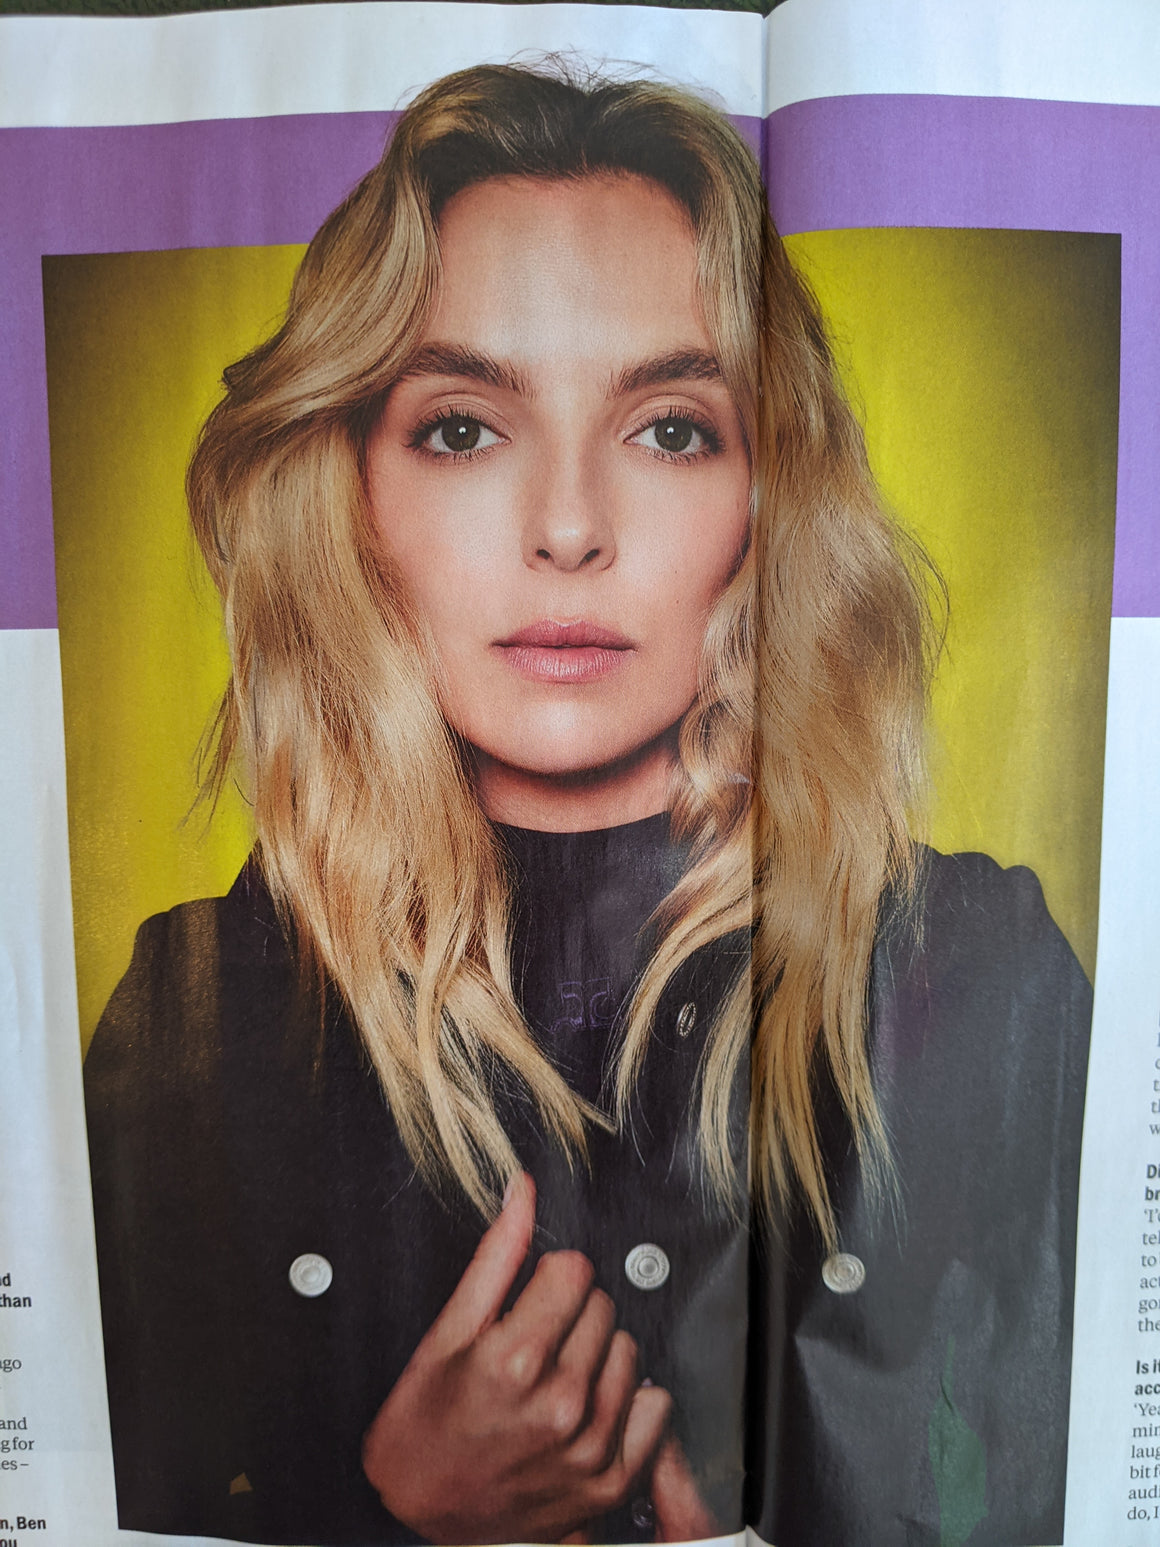 TIME OUT London Mag 05/10/2021 Jodie Comer interview The Last Duel